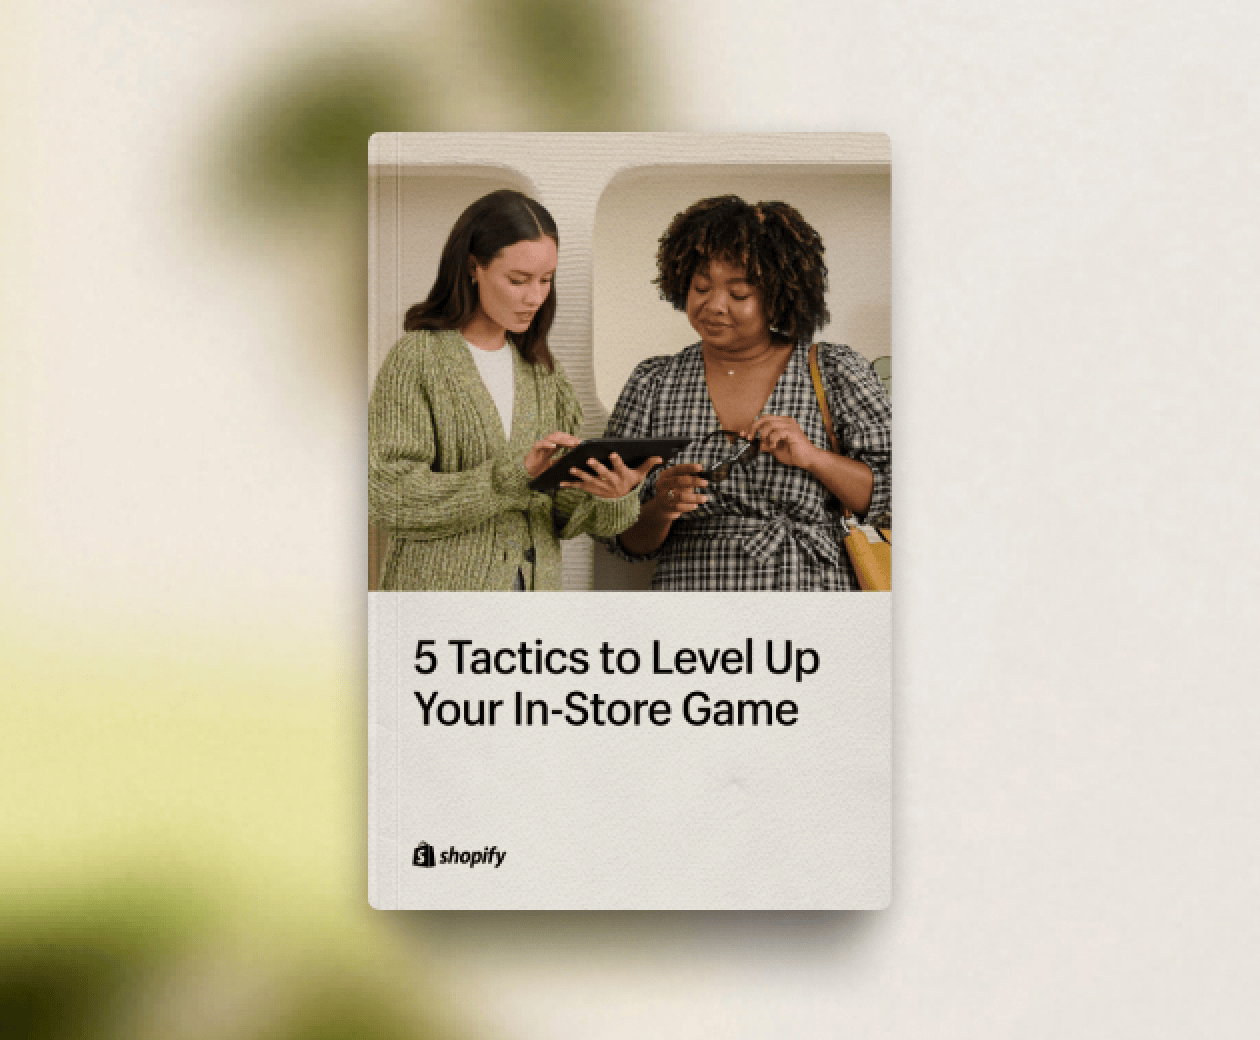 The cover of the essential in-store playbook from Shopify.